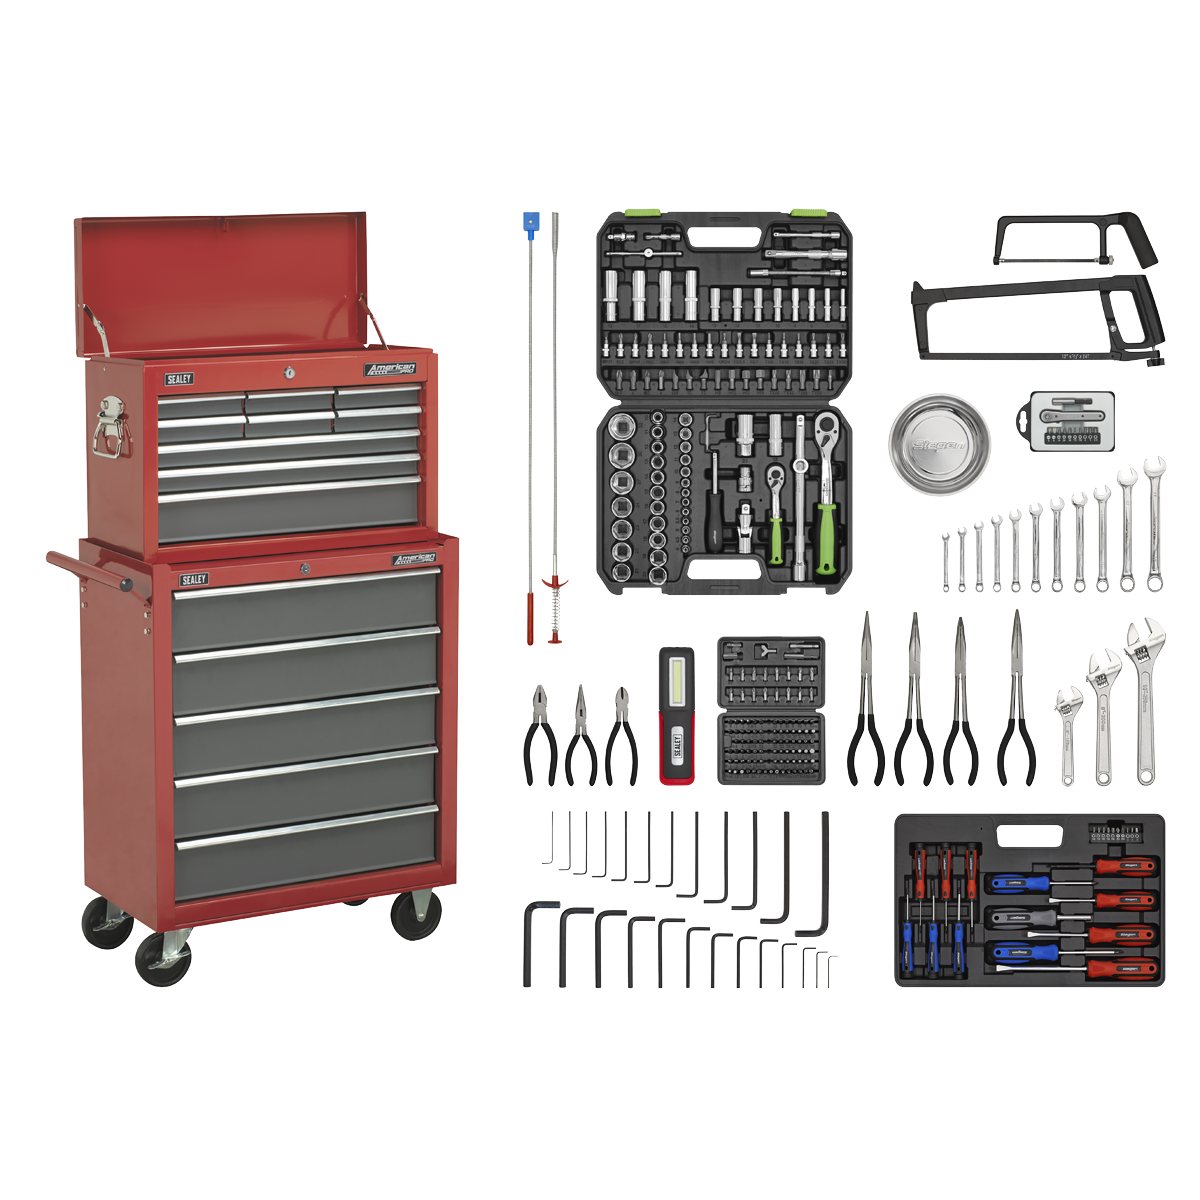 Topchest & Rollcab Combination 14 Drawer with Ball-Bearing Slides - Red/Grey & 281pc Tool Kit - AP2250BBCOMBO - Farming Parts